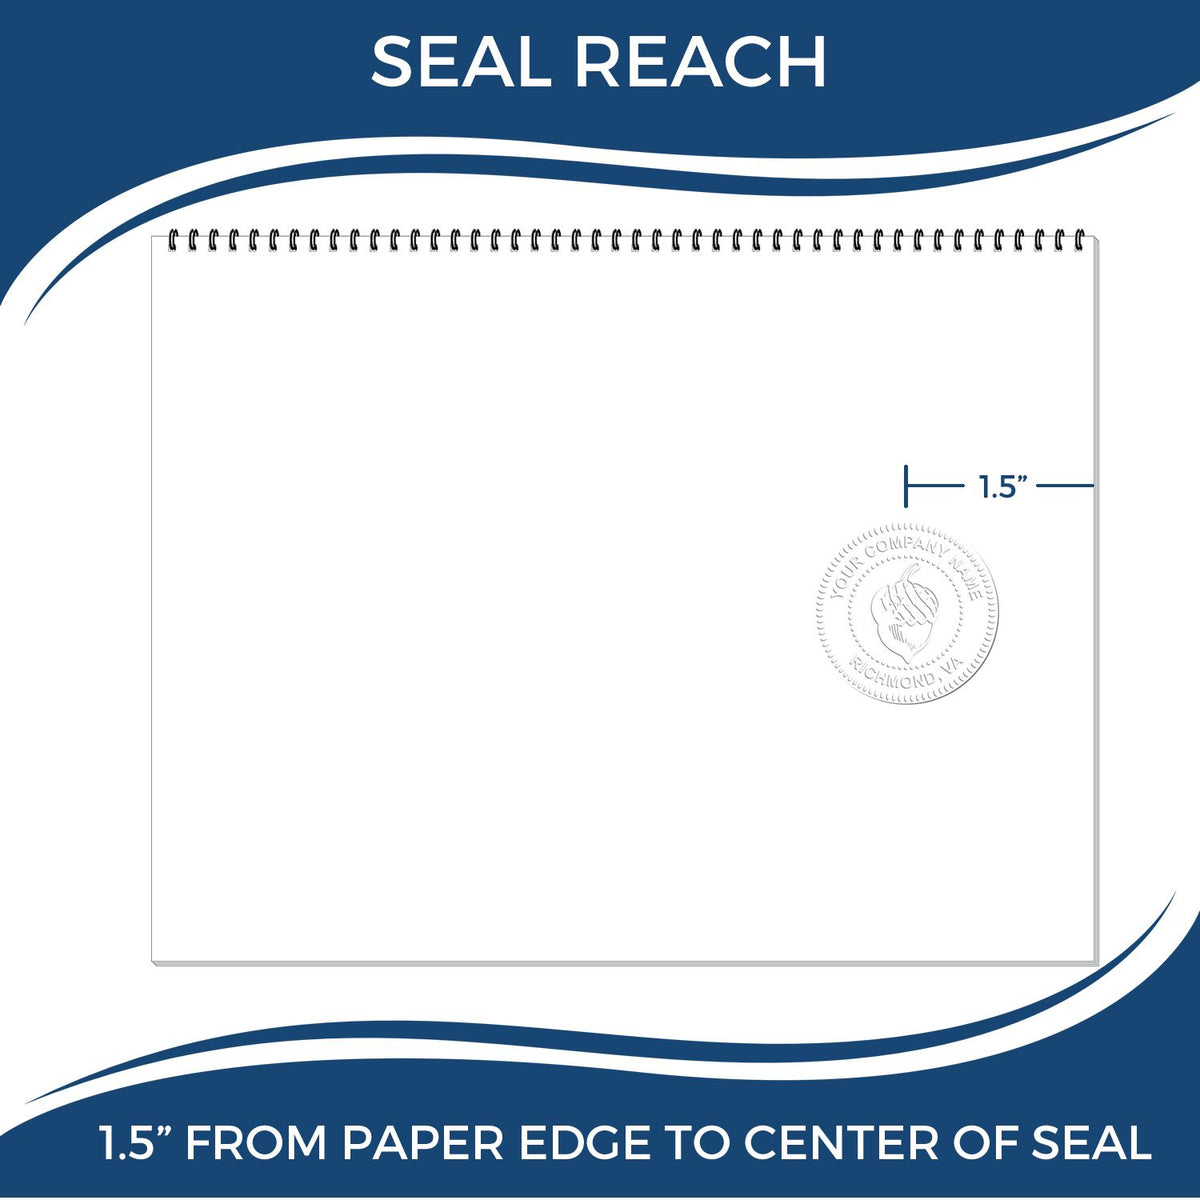 An infographic showing the seal reach which is represented by a ruler and a miniature seal image of the Maryland Engineer Desk Seal